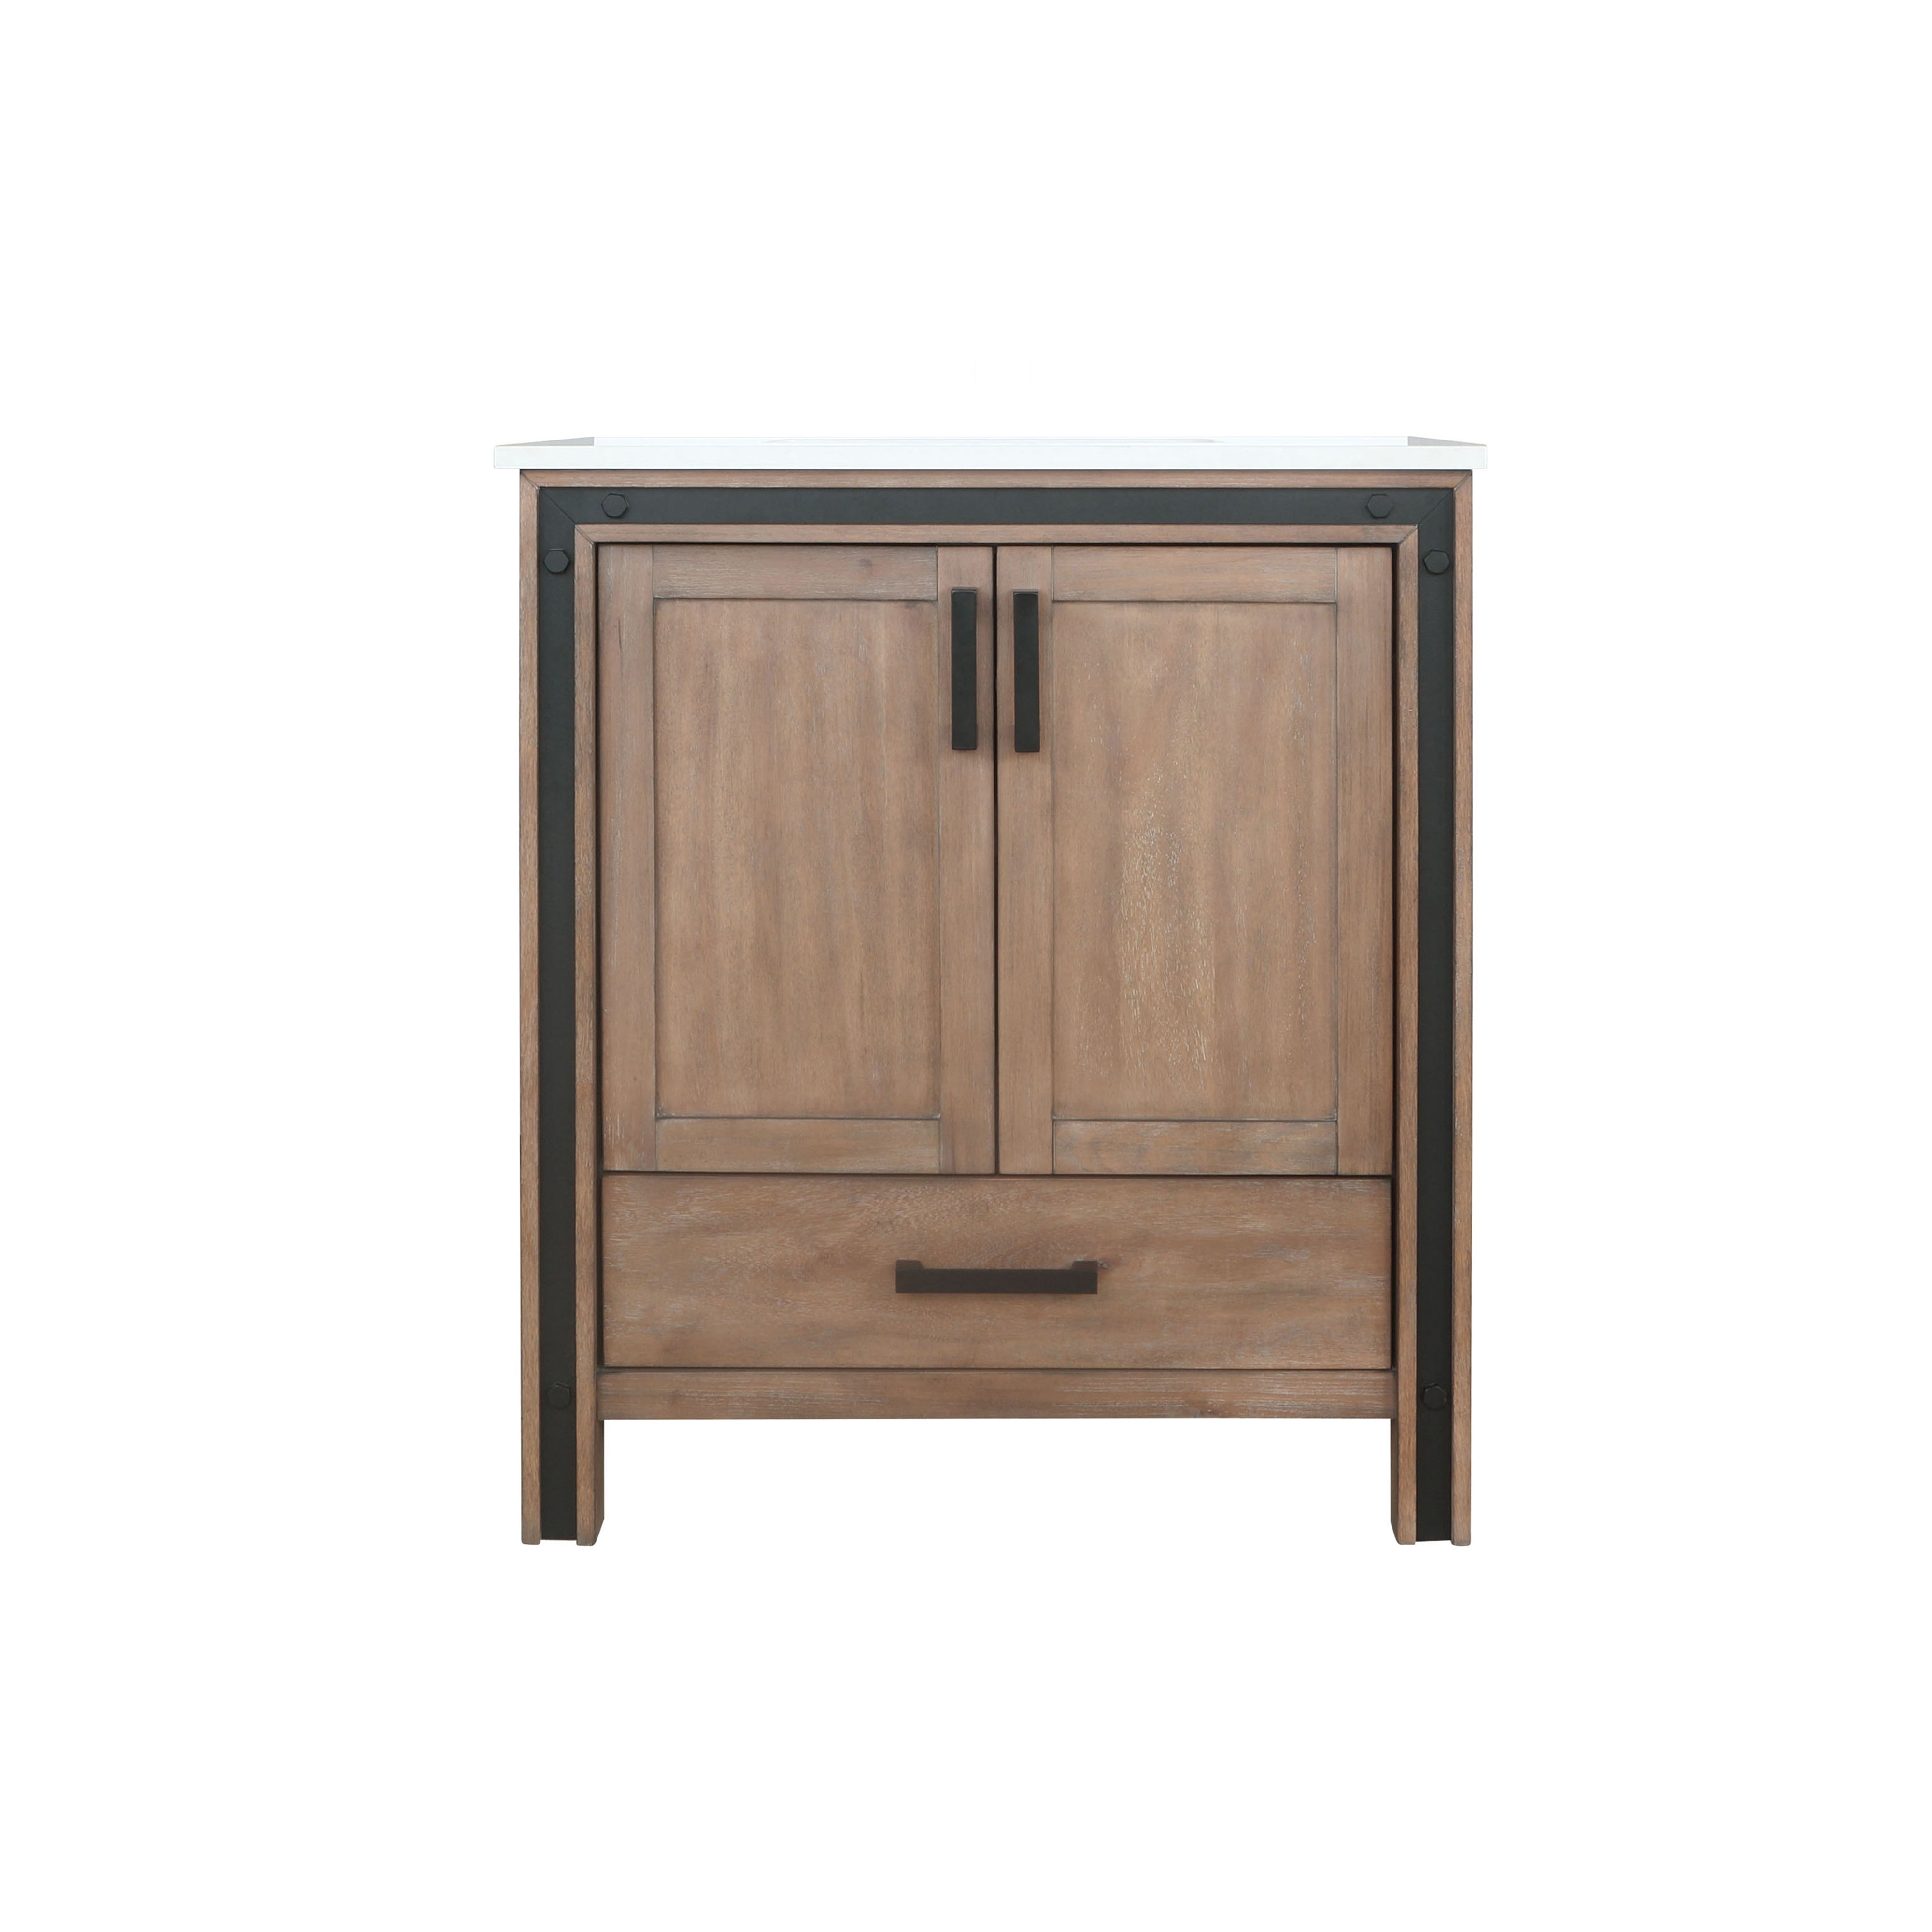 Lexora Ziva LZV352230SNJS000 30" Single Bathroom Vanity in Rustic Barnwood with Cultured Marble, Integrated Sink, Front View